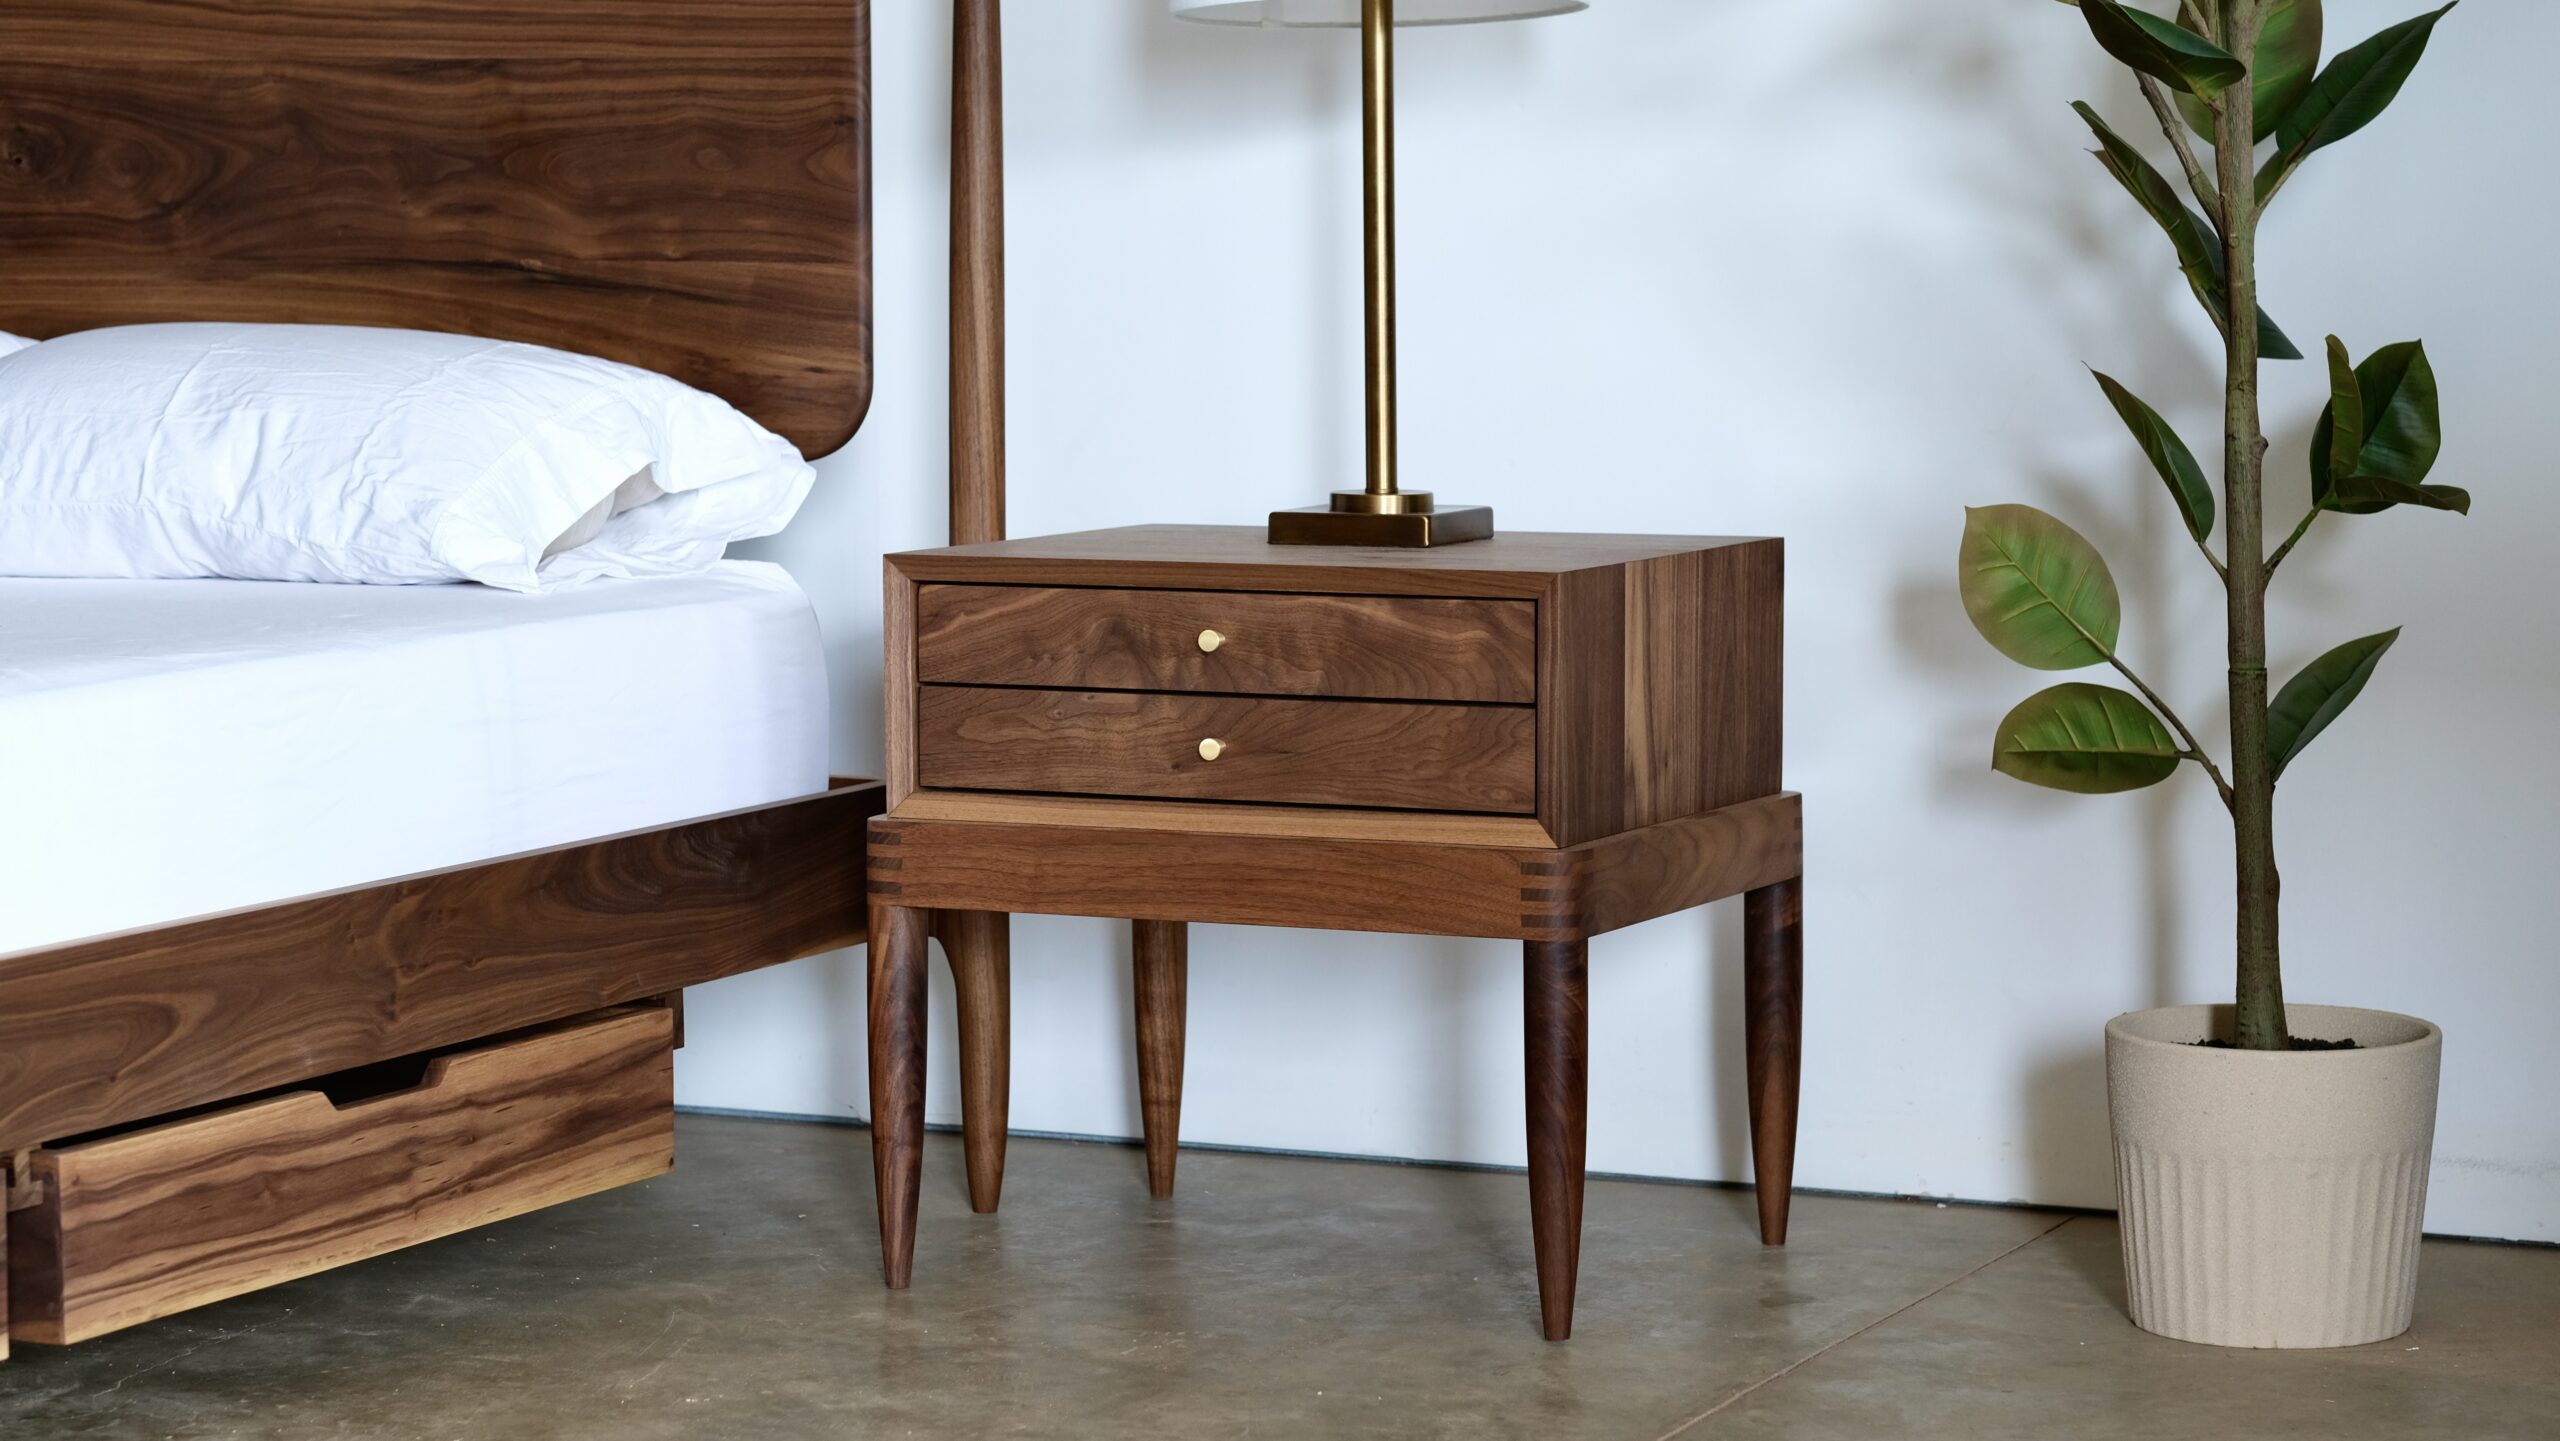 A solid wood nightstand made of walnut with two shallow drawers and round brass pulls.